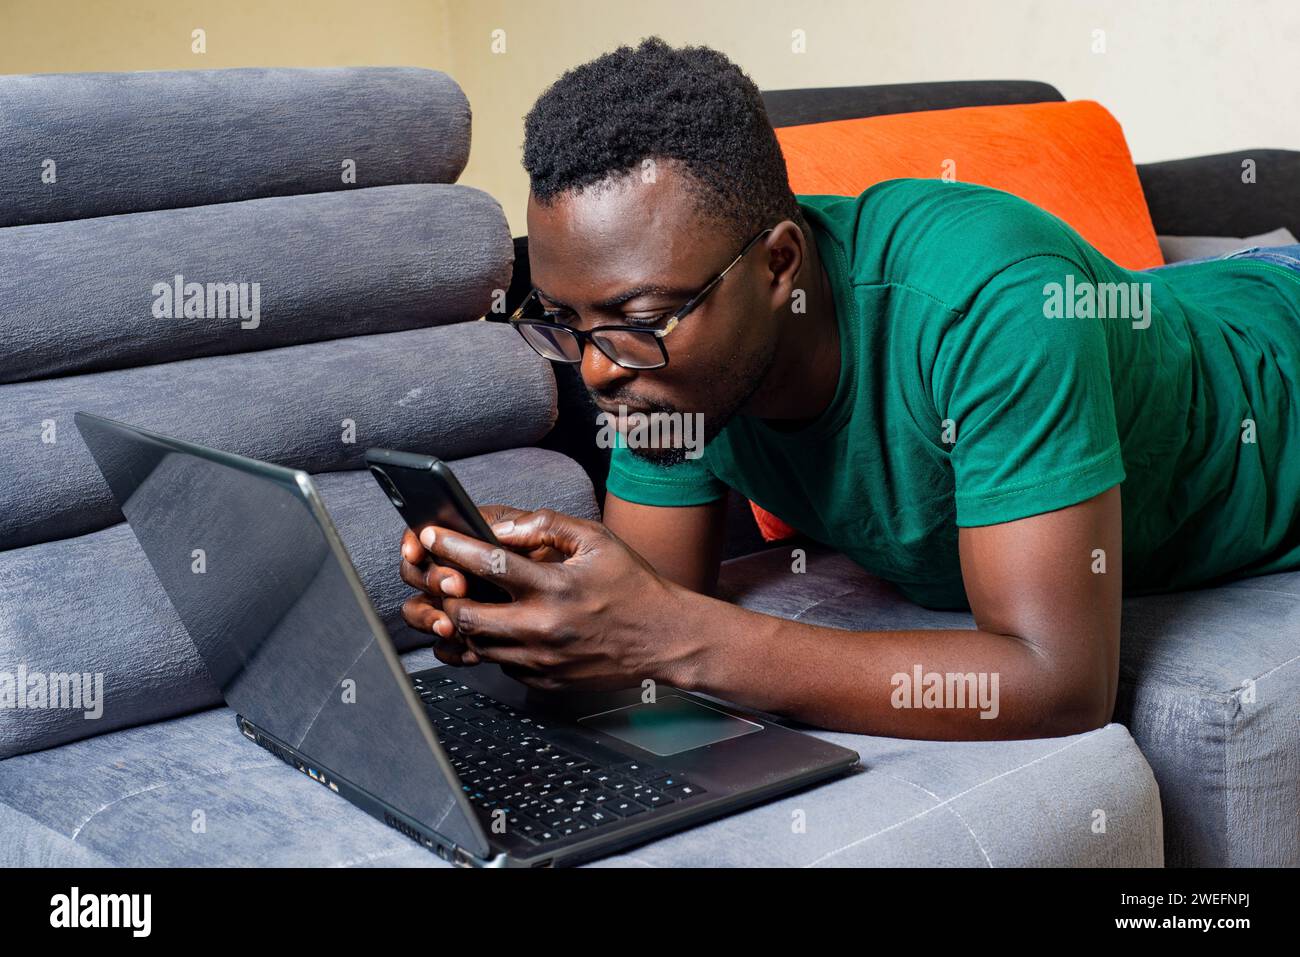 young man wearing optical glasses lying on sofa at home uses mobile phone and laptop. Stock Photo